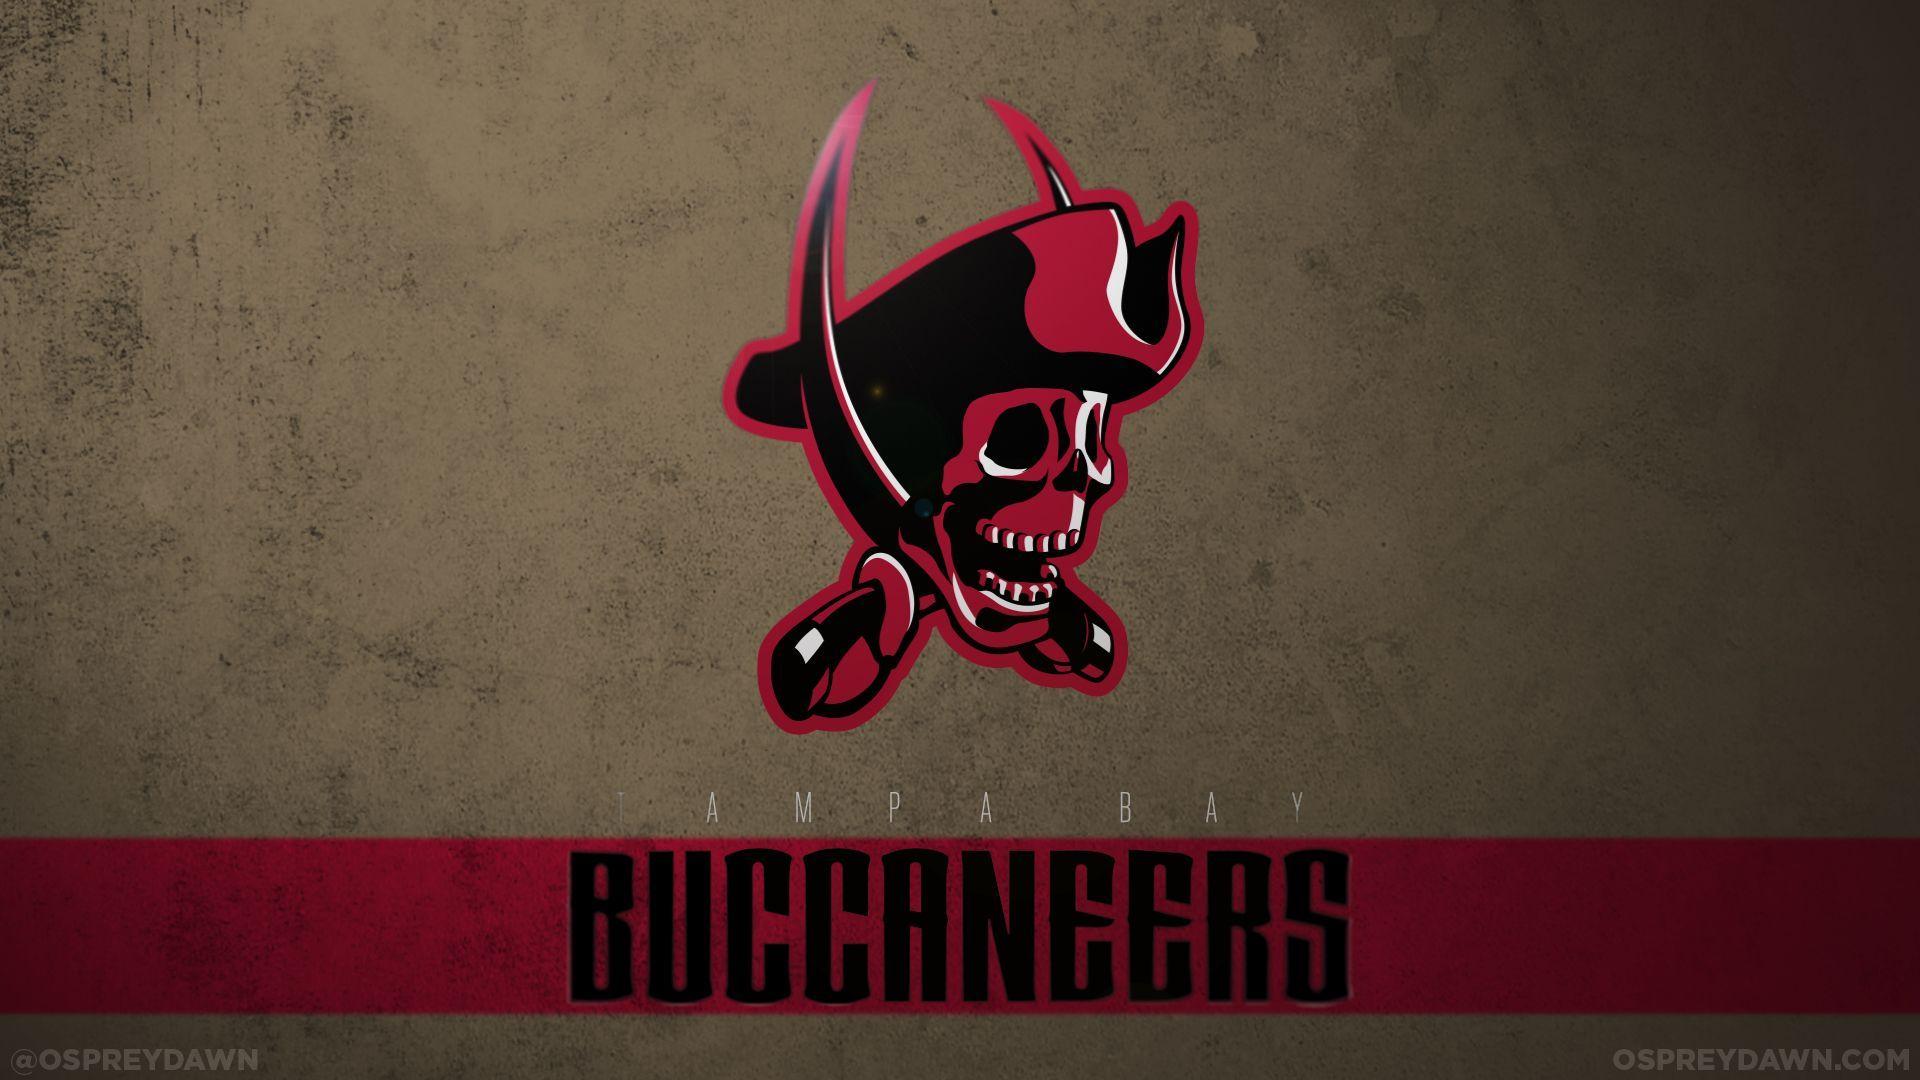 NFL Buccaneers Logo - Tampa Bay Buccaneers Wallpapers PC iPhone Android | HD Wallpapers ...